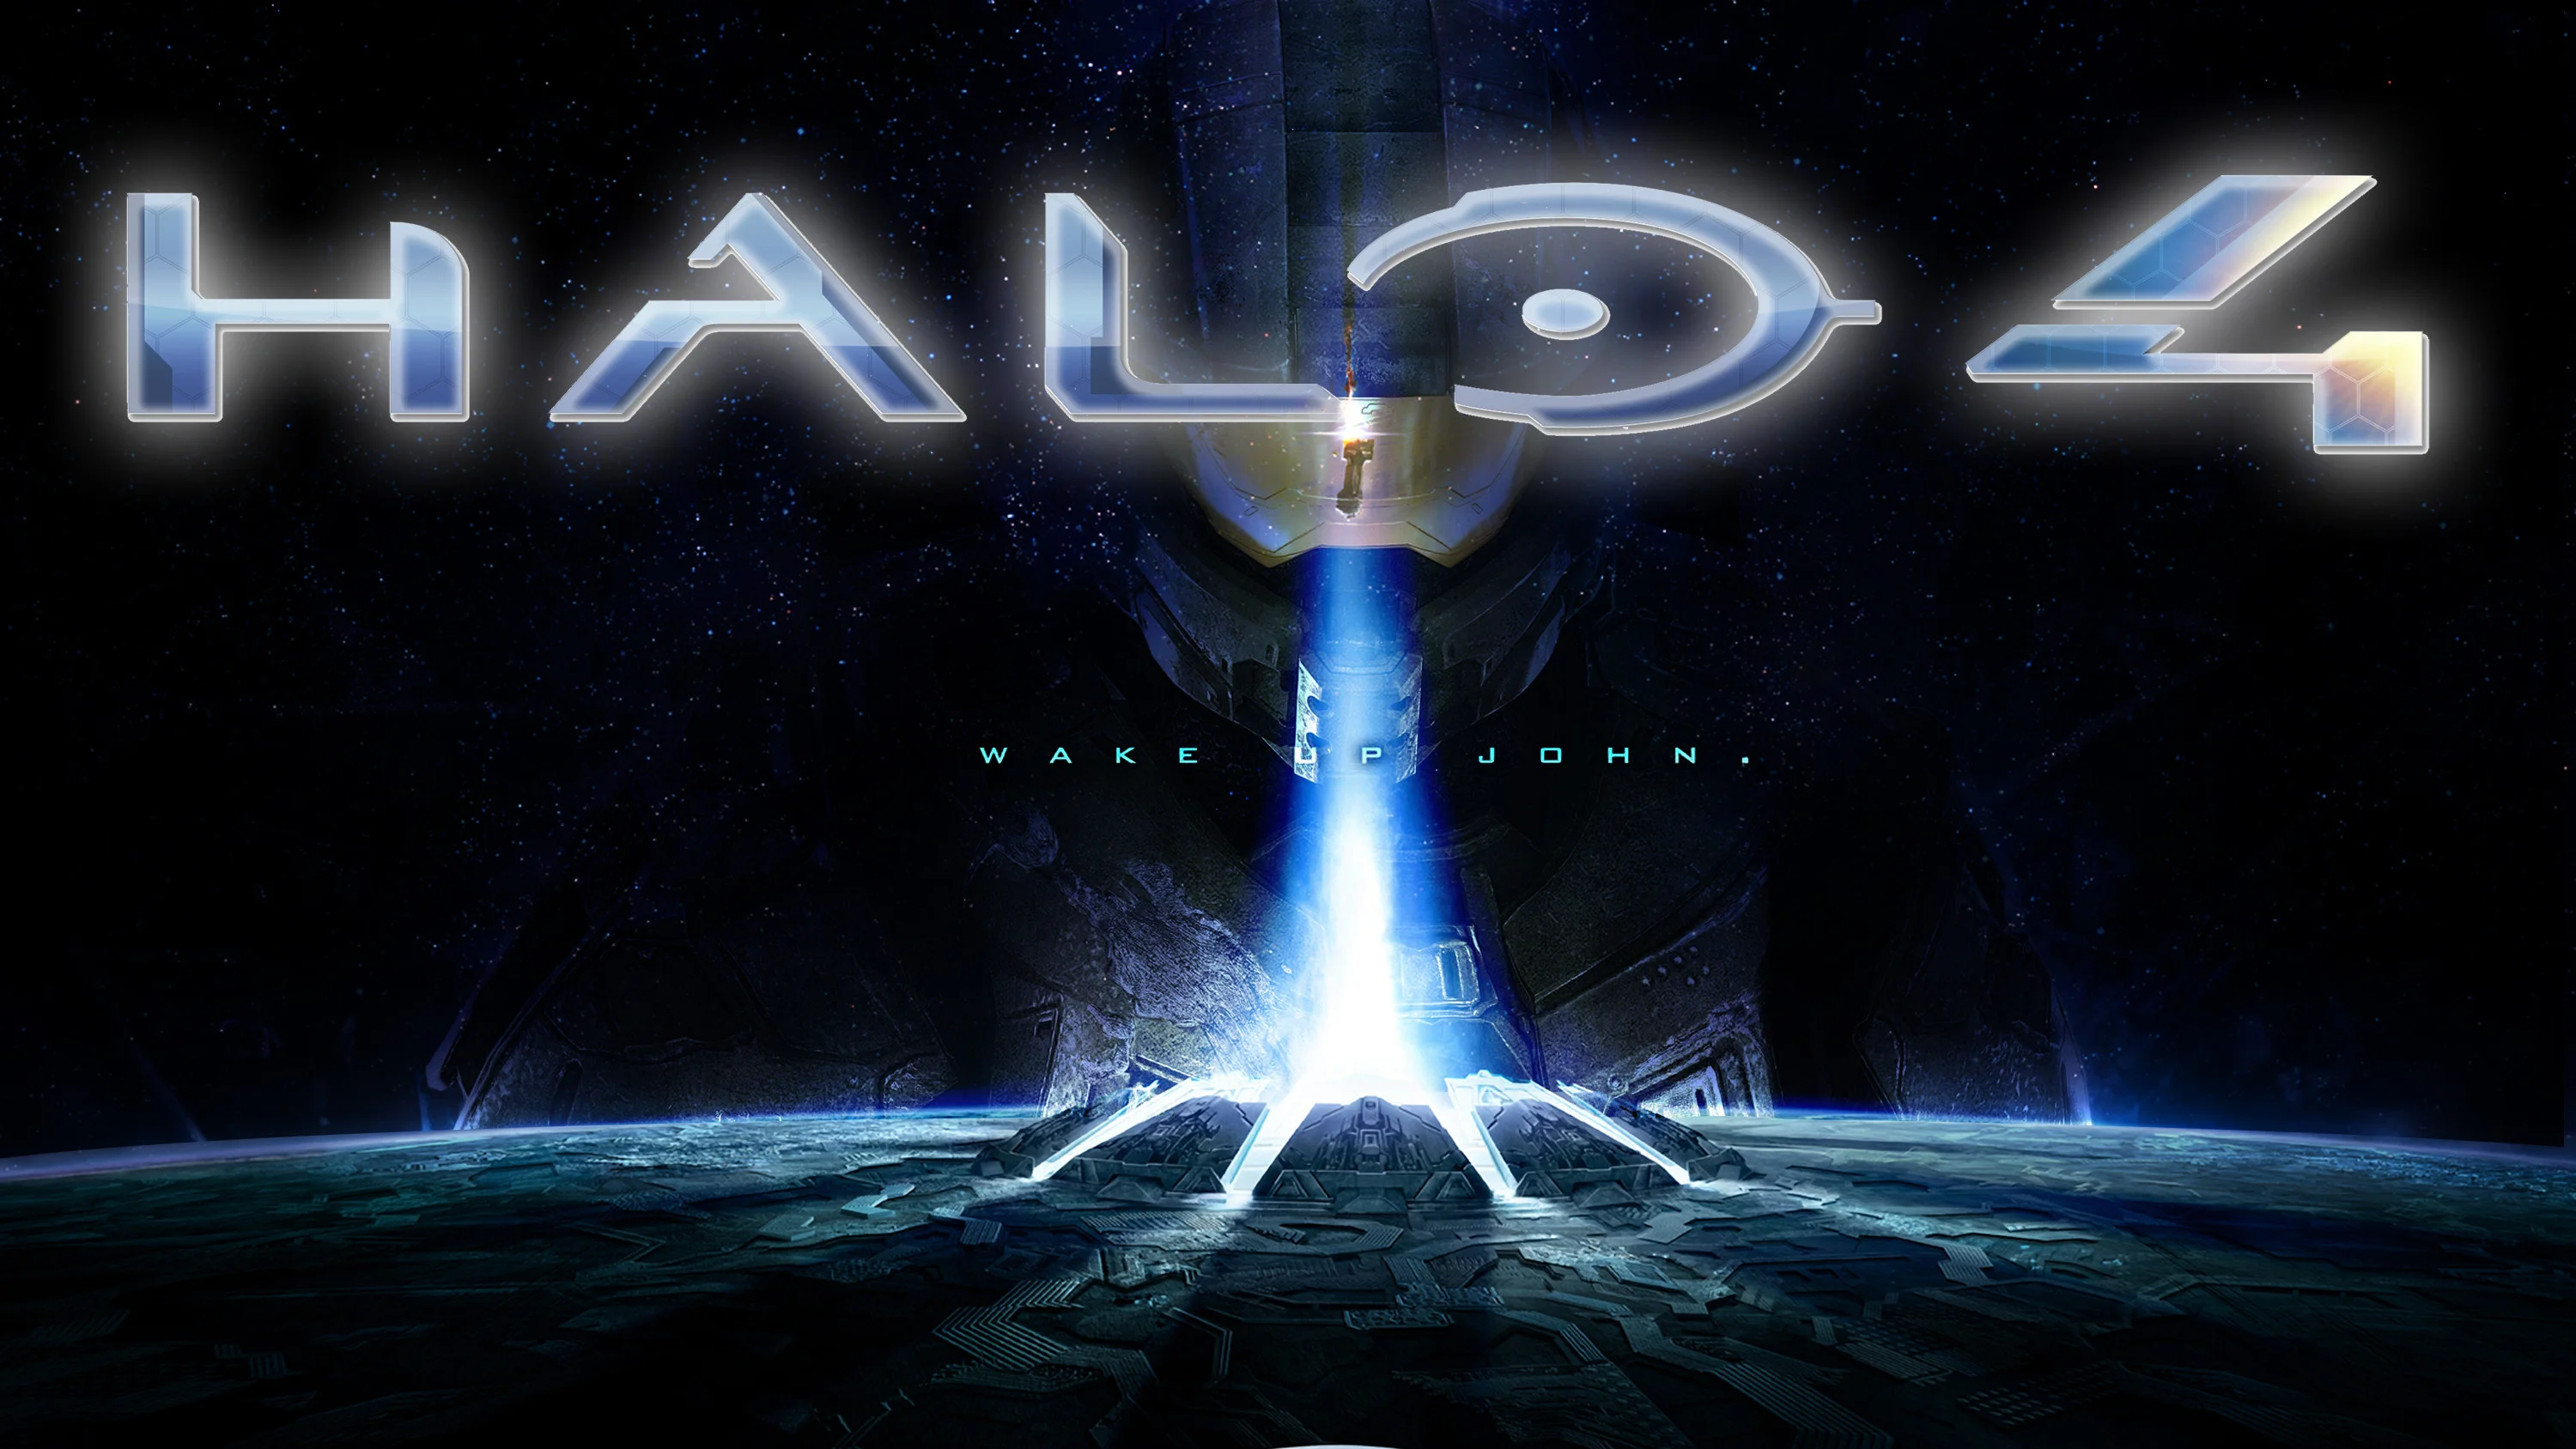 Epic Halo Wallpapers Halo 4 wallpaper by tahu1179